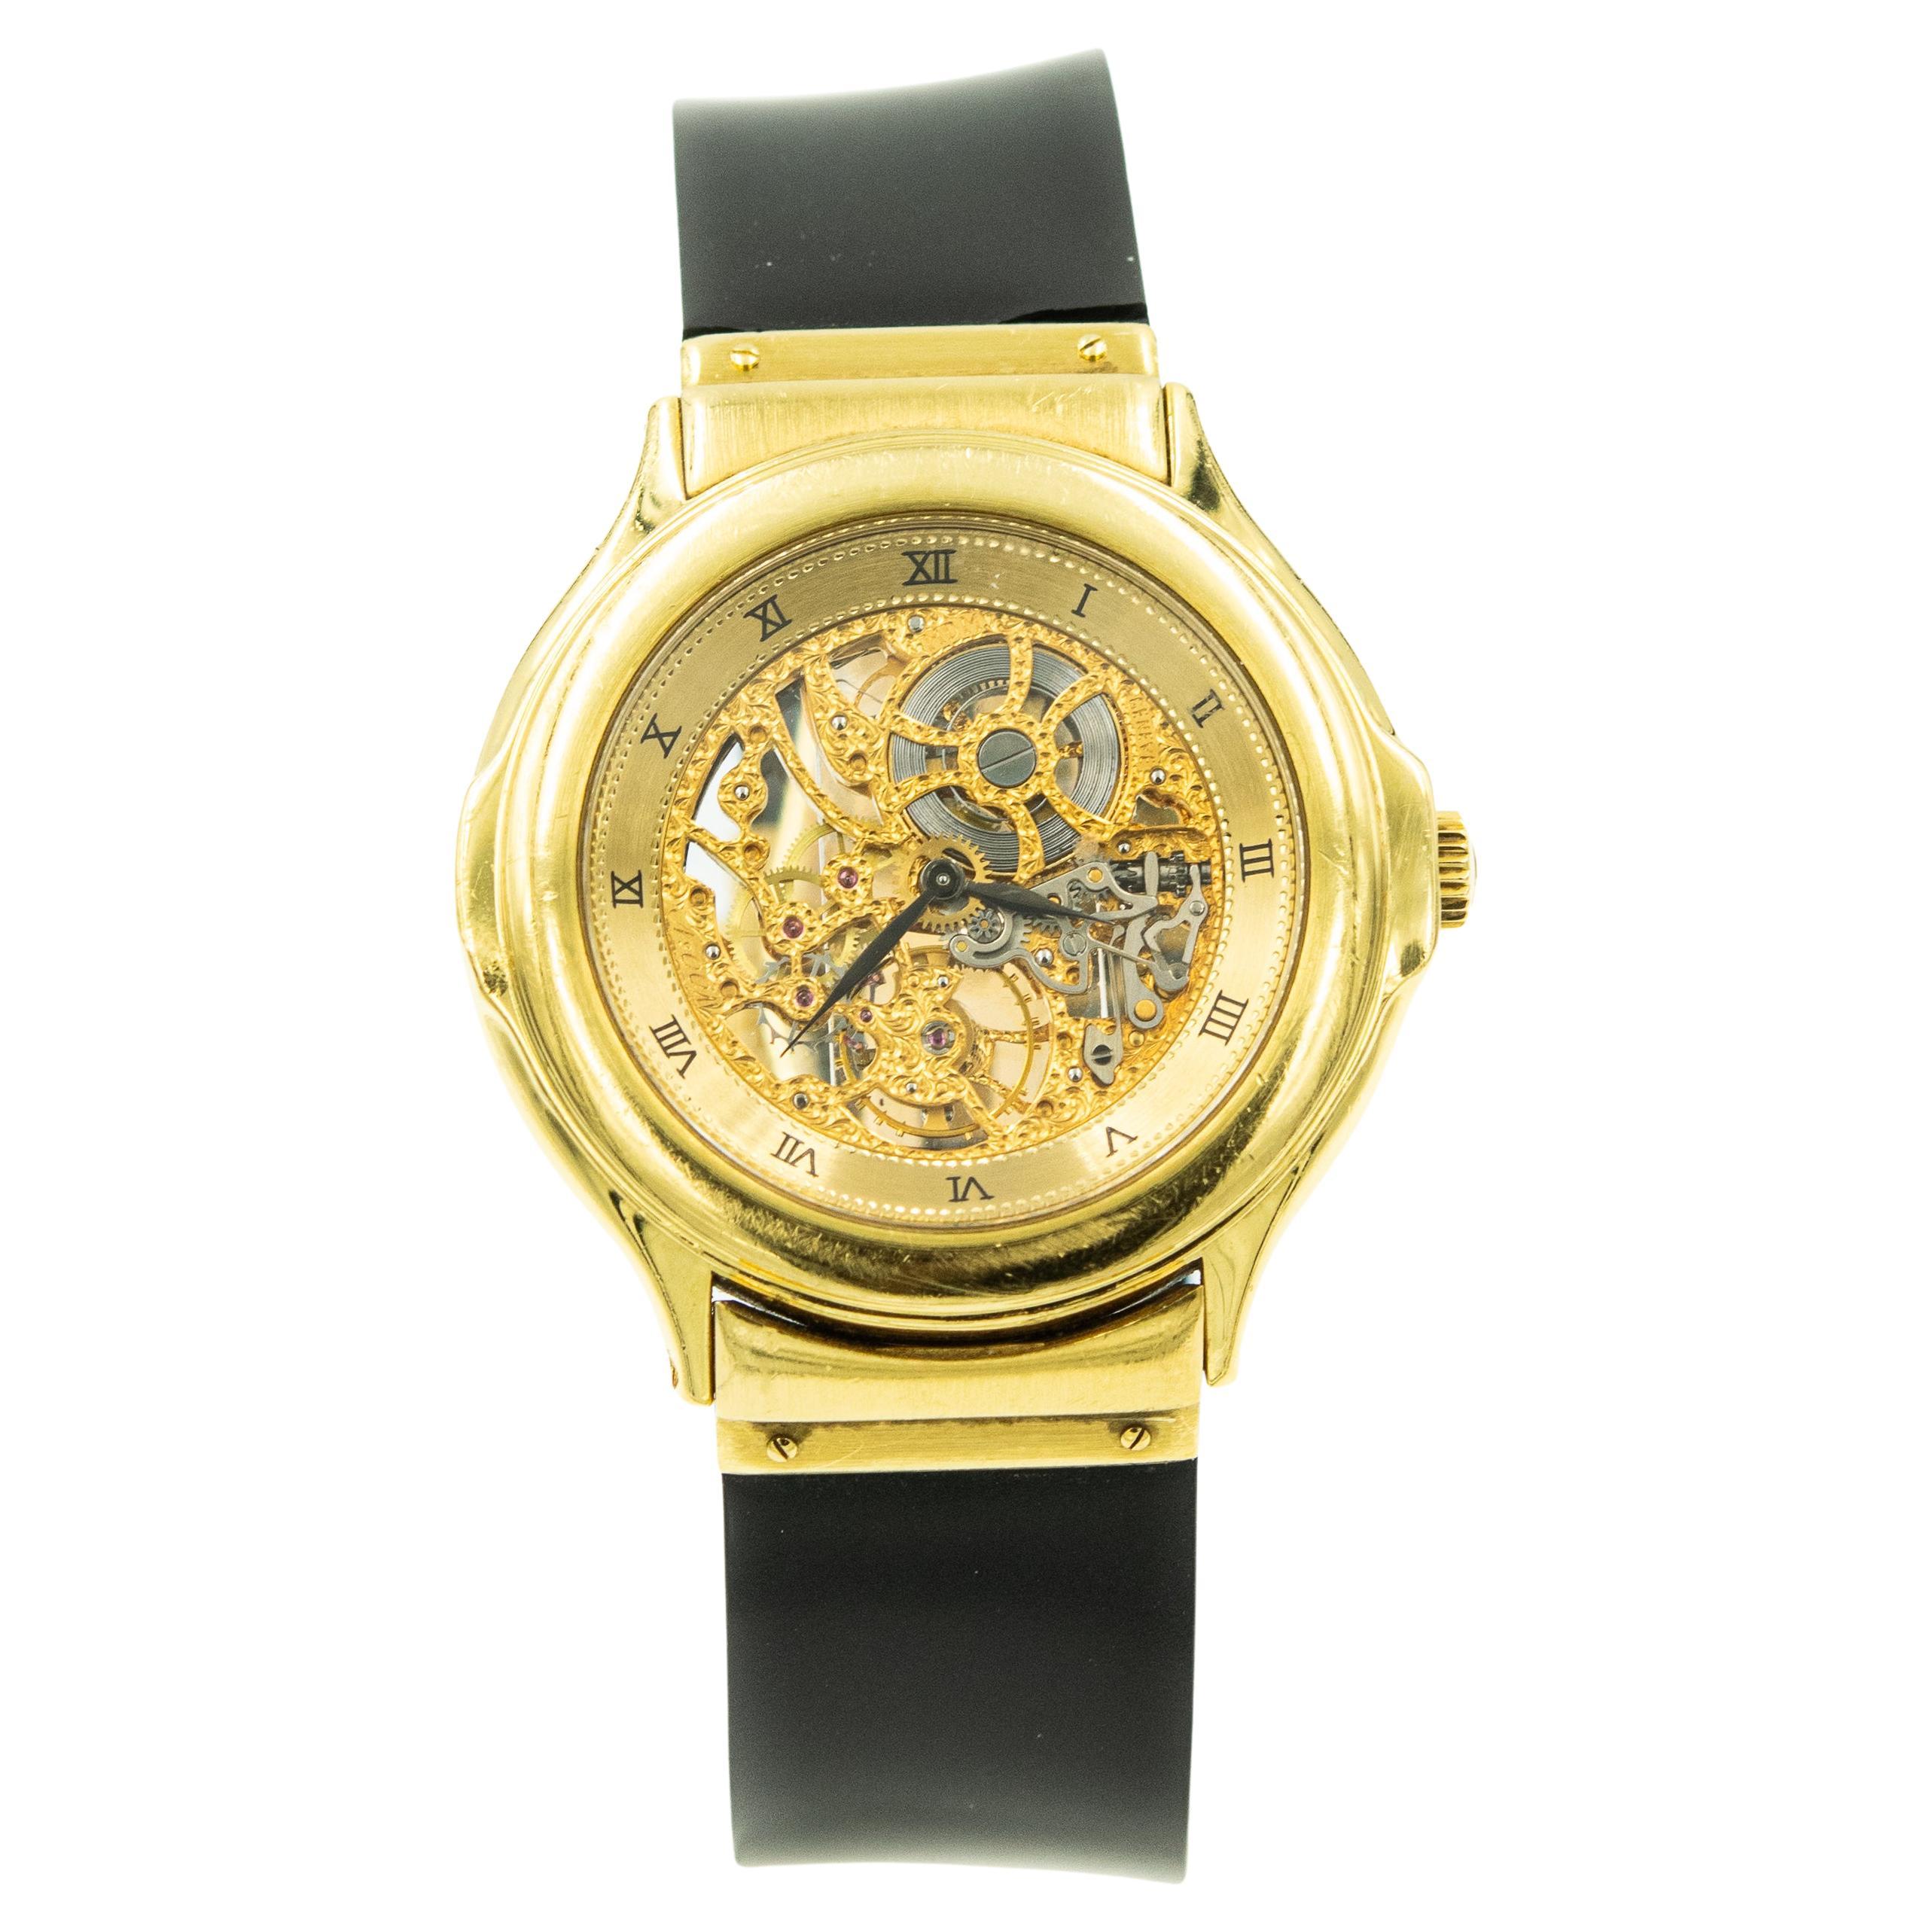 Limited Edition Hublot Unisex MDM Skeleton 18k Yellow Gold Watch Ref. 1512.3 For Sale